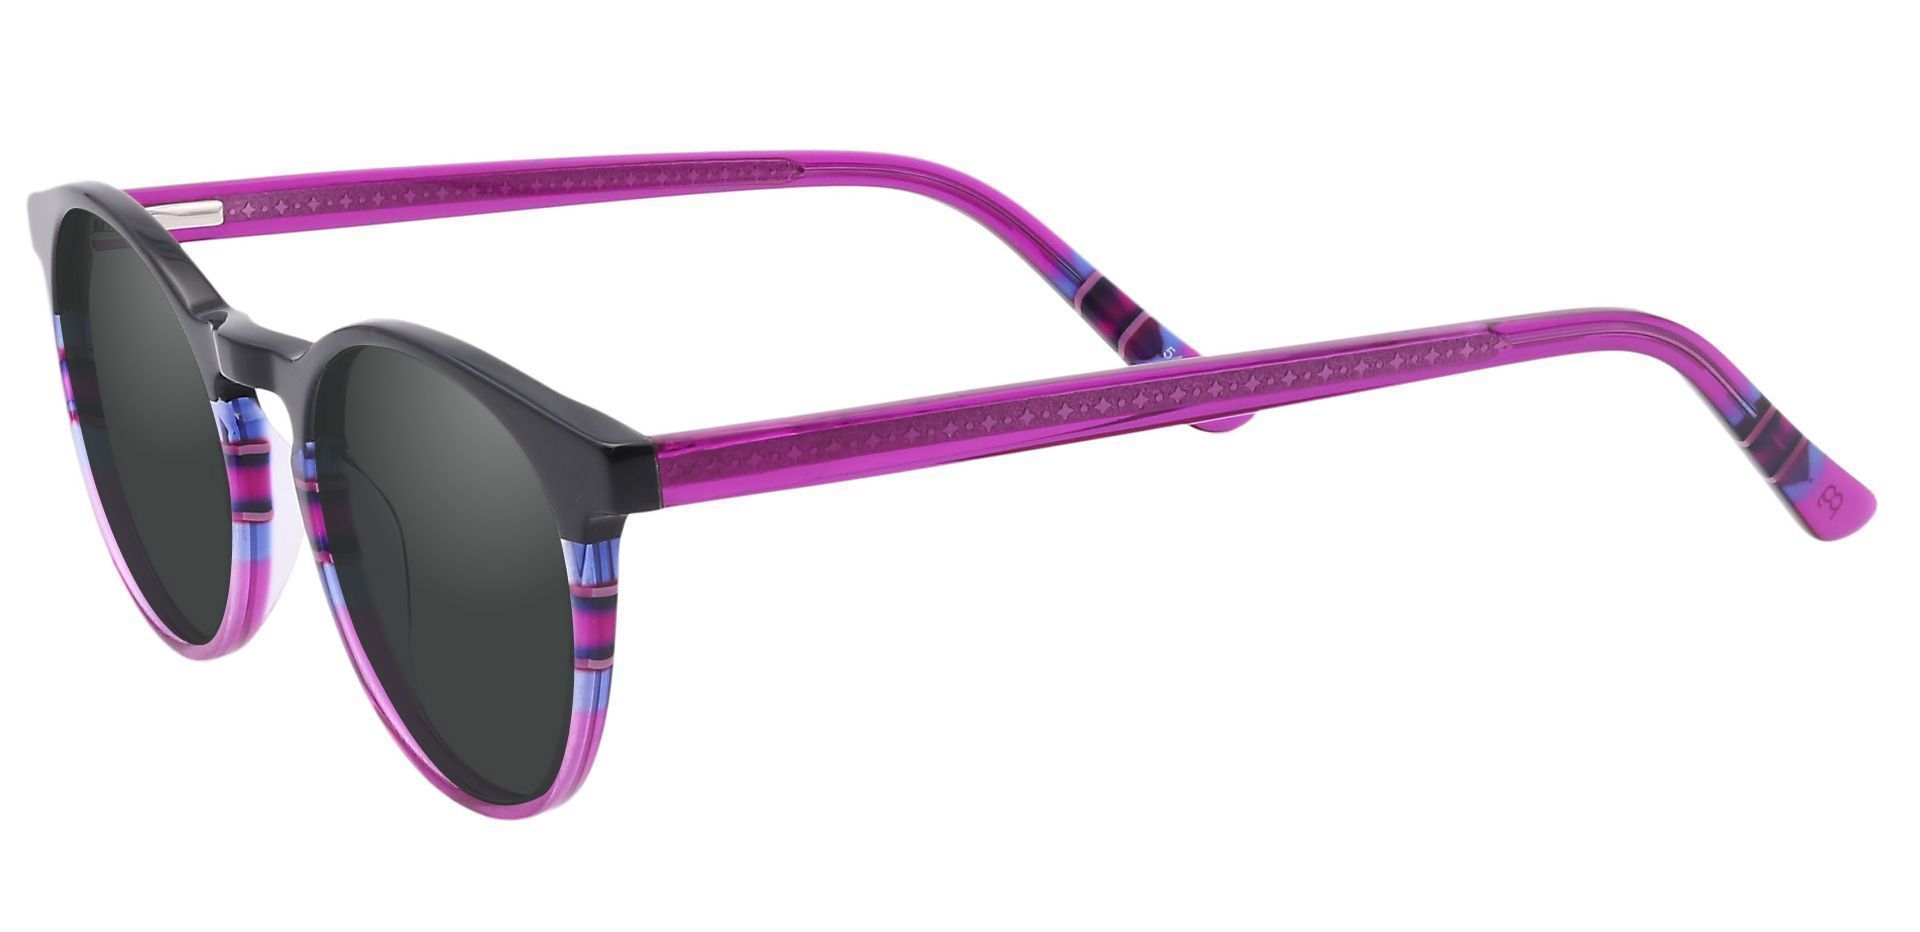 Jellie Round Reading Sunglasses - Purple Frame With Gray Lenses